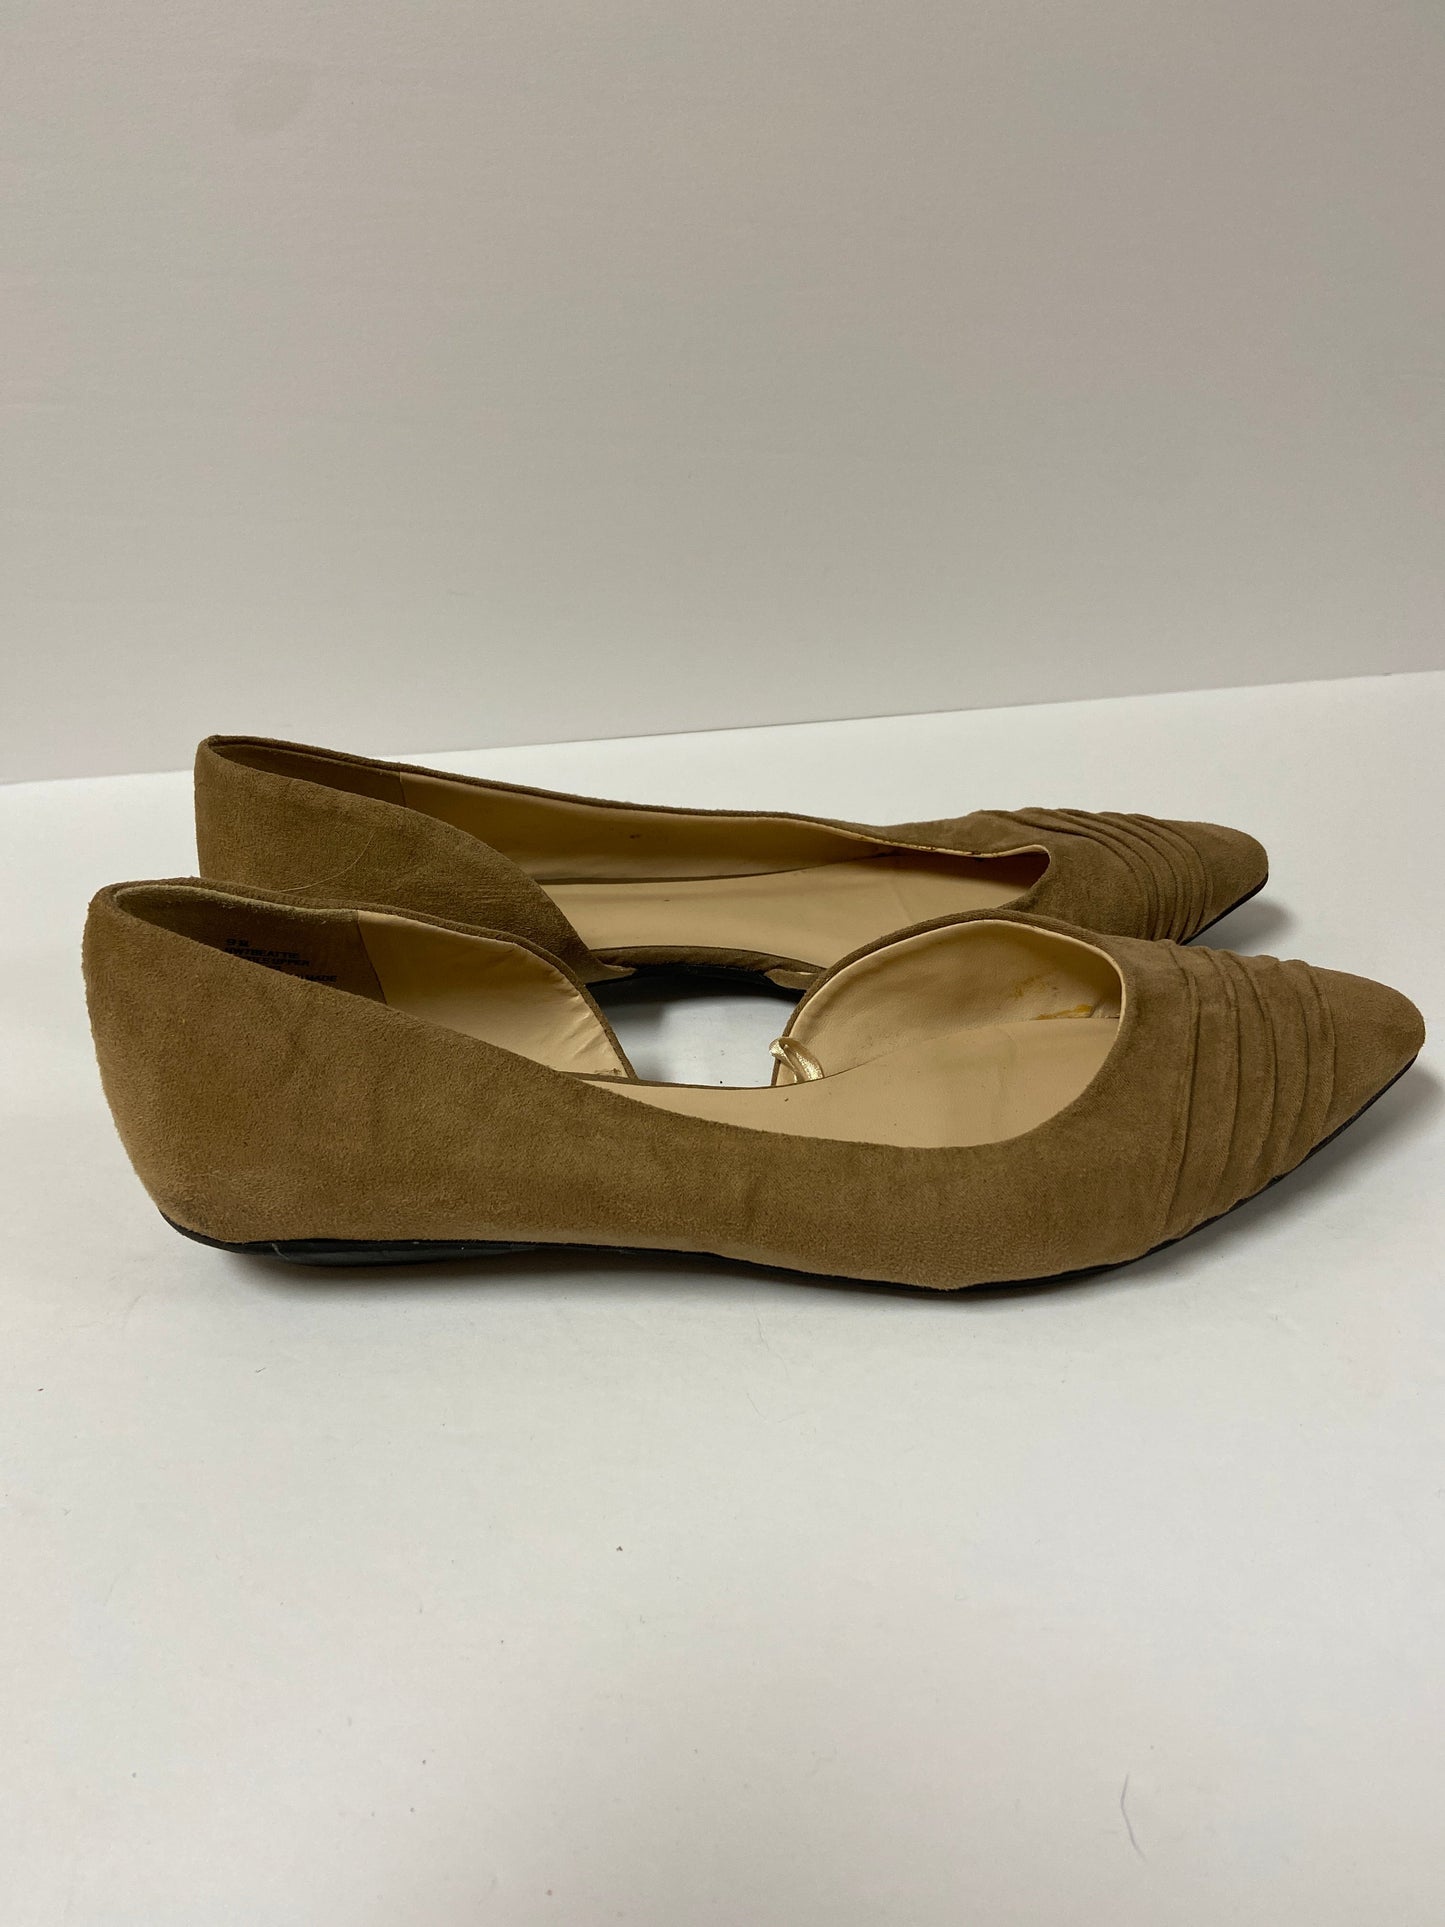 Shoes Flats Ballet By Nine West  Size: 9